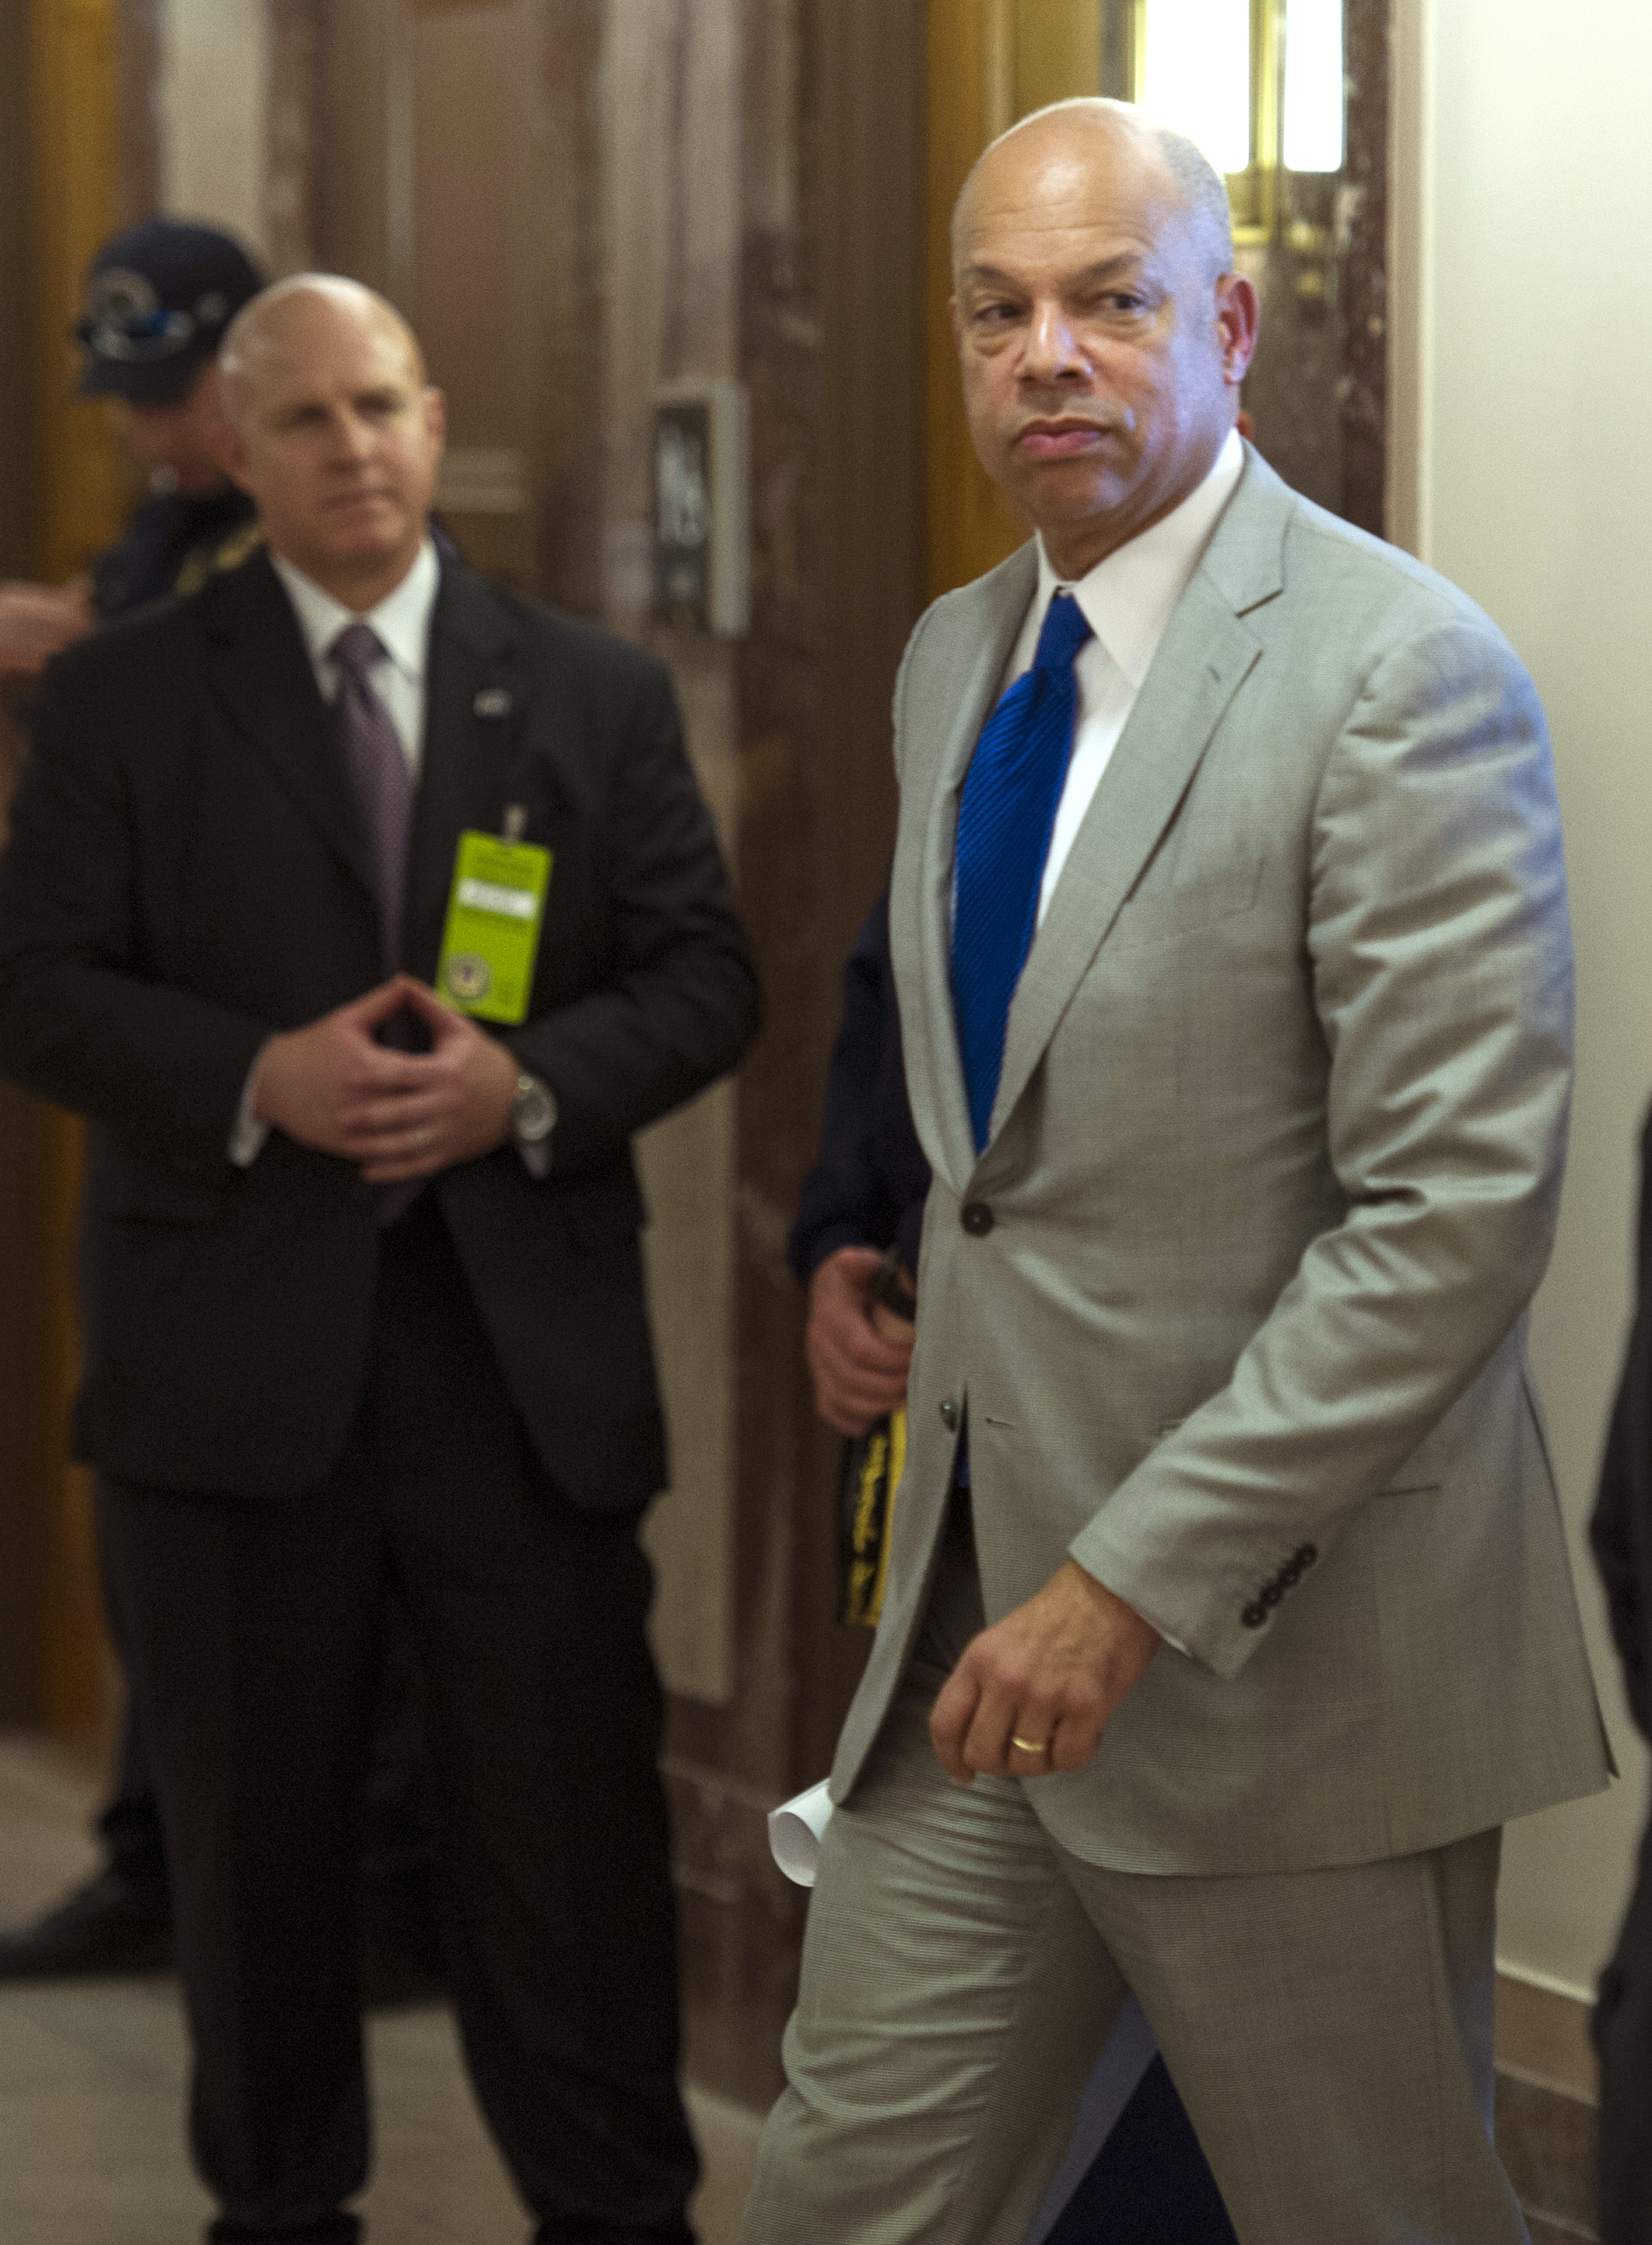 Homeland Security Secretary Jeh Johnson walks to a hearing room to answer questions before a closed meeting of the Senate Homeland Security Committee in Washington, D.C., on April 1, 2014.